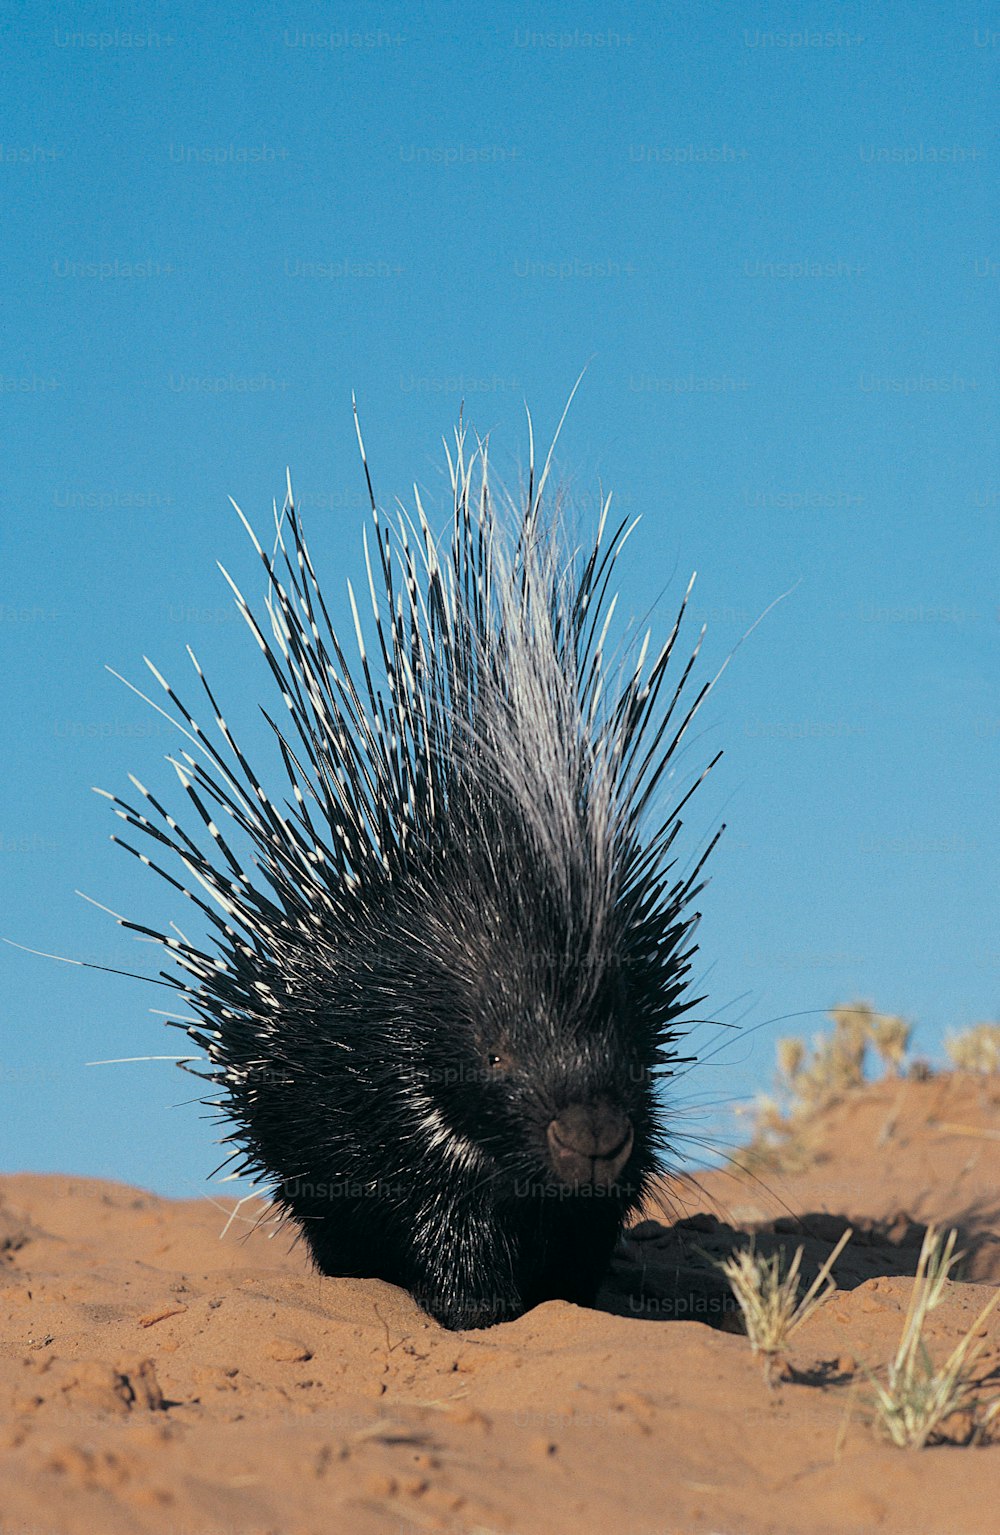 a porcupine walking through the sand in the desert